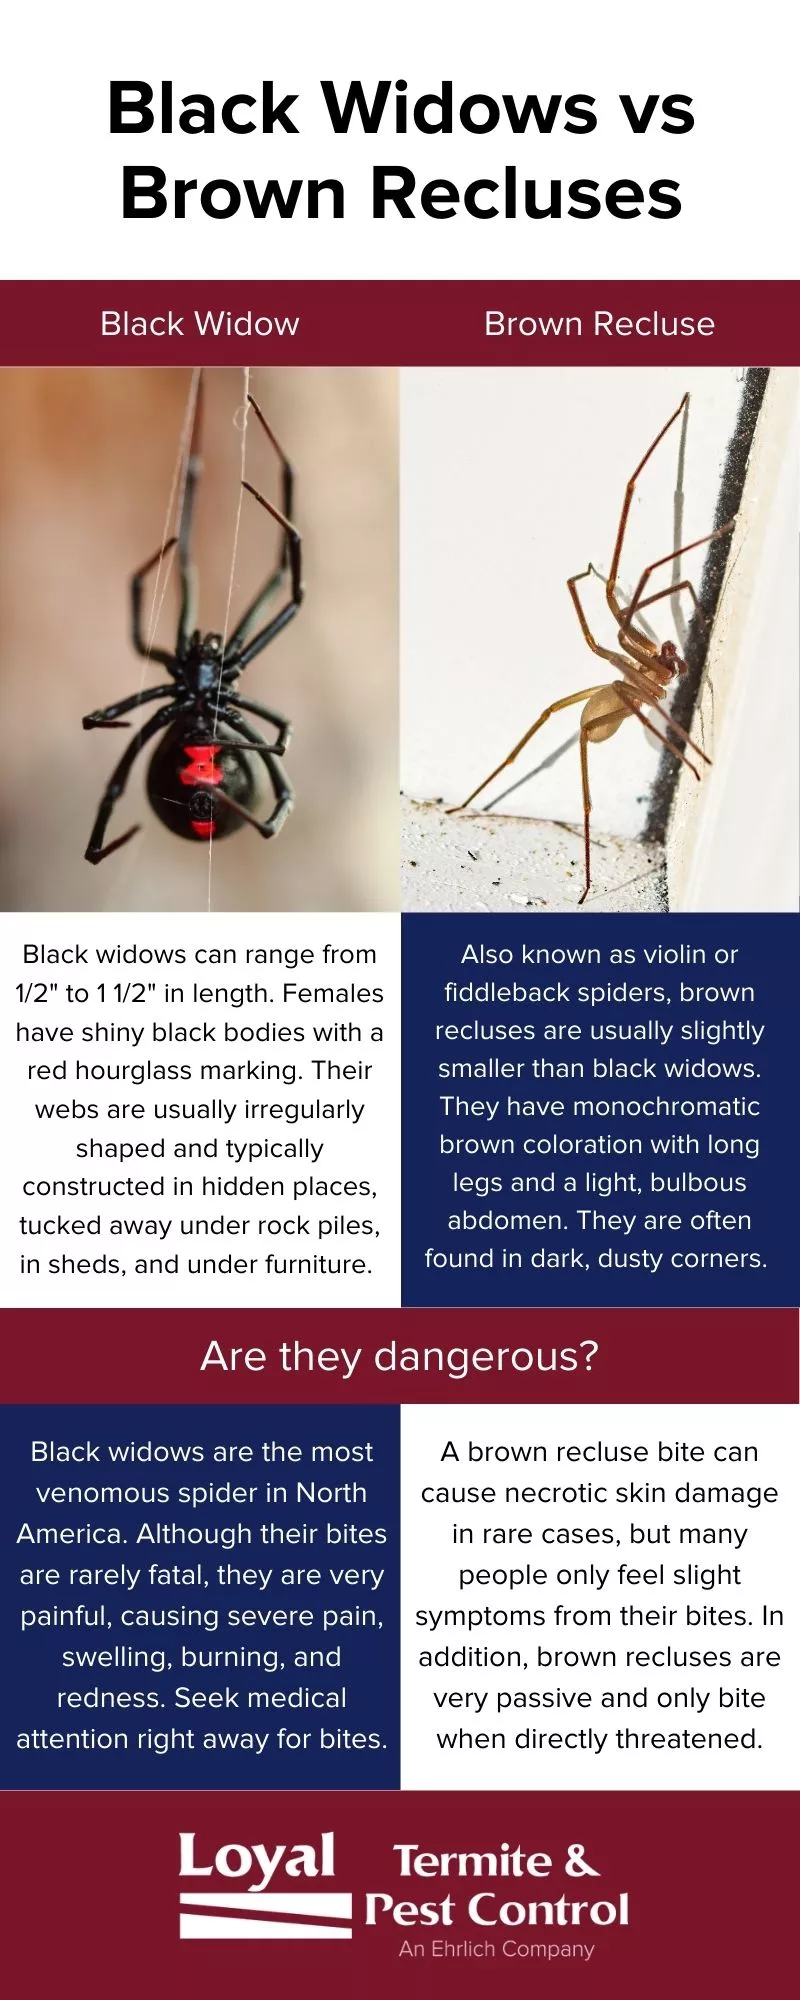 The difference between black widows and brown recluses in Eastern & Central Virginia - Loyal Termite & Pest Control